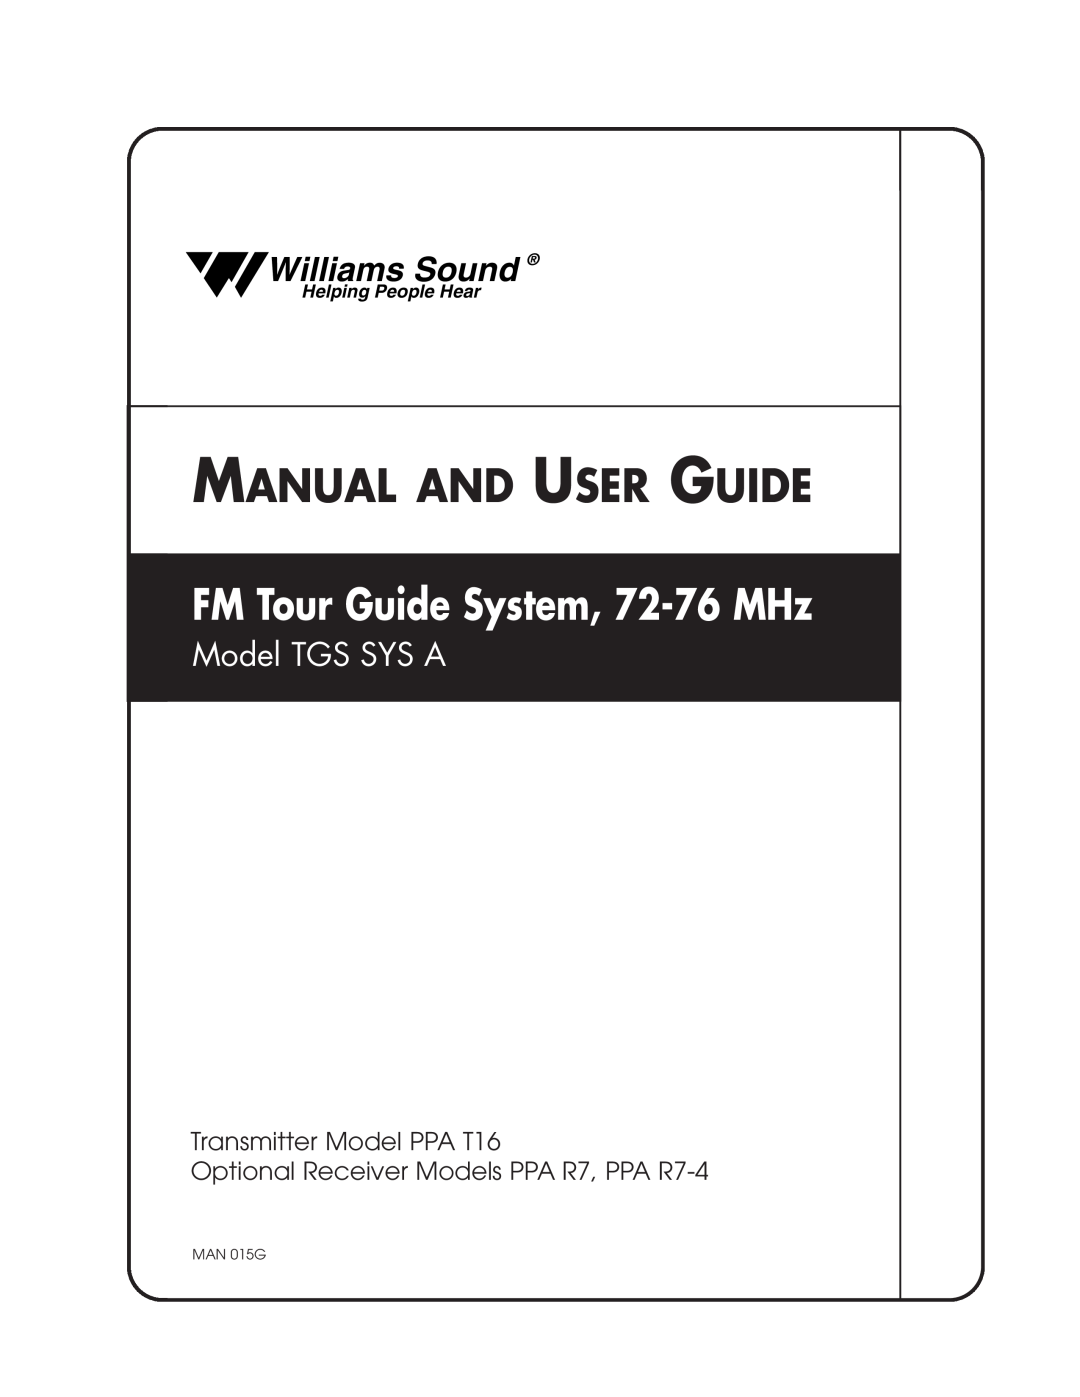 Williams Sound manual Manual And User Guide, FM Tour Guide System, 72-76MHz, Williams Sound, Model TGS SYS A, MAN 015G 